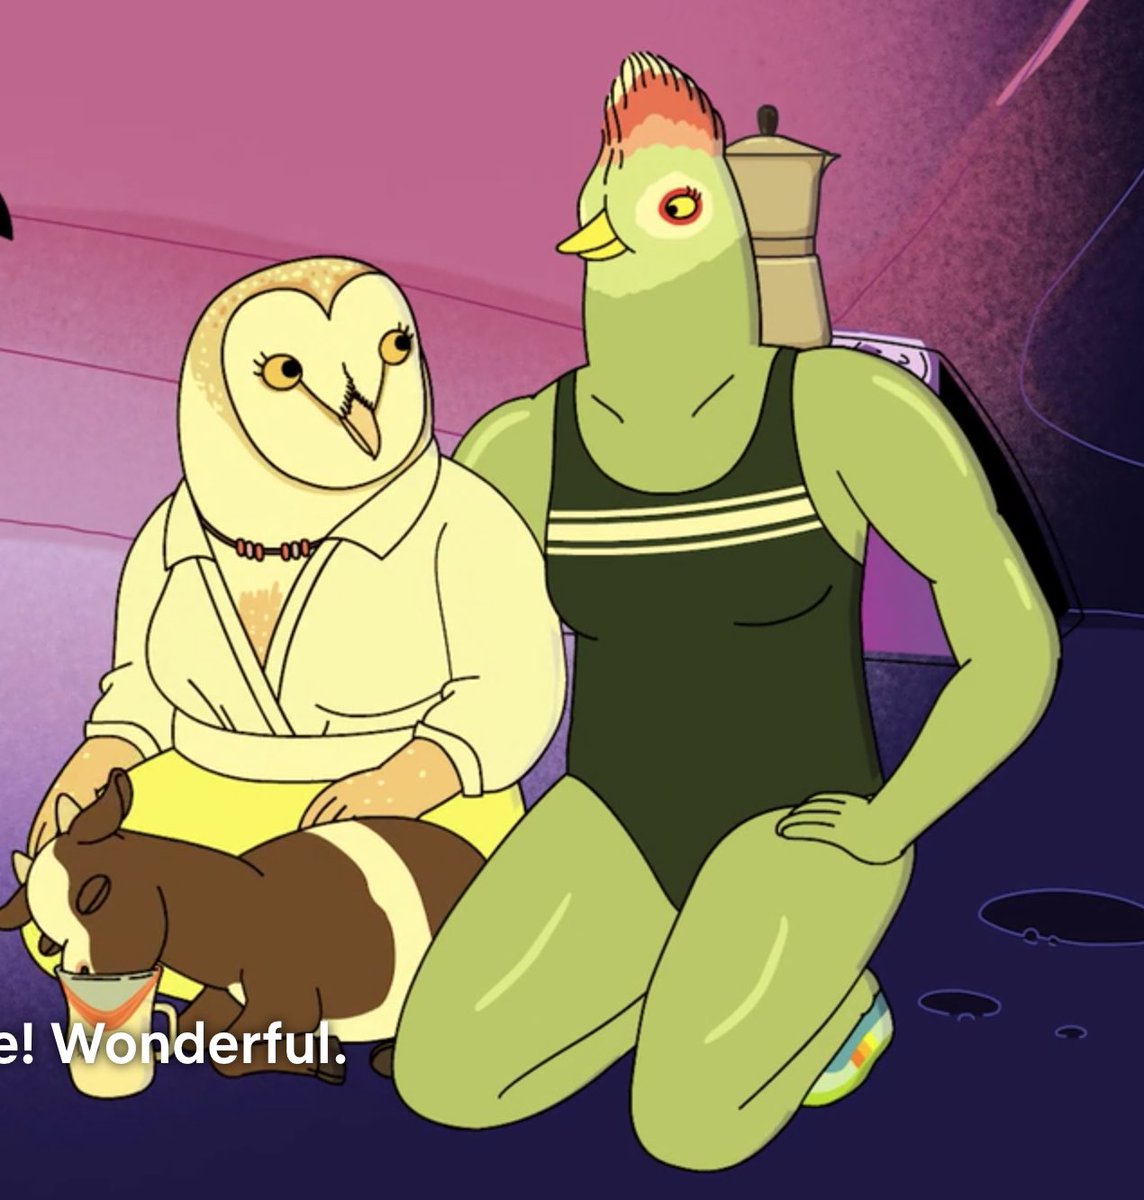 tuca and bertie went straight for my little lesbian jugular having a happil...